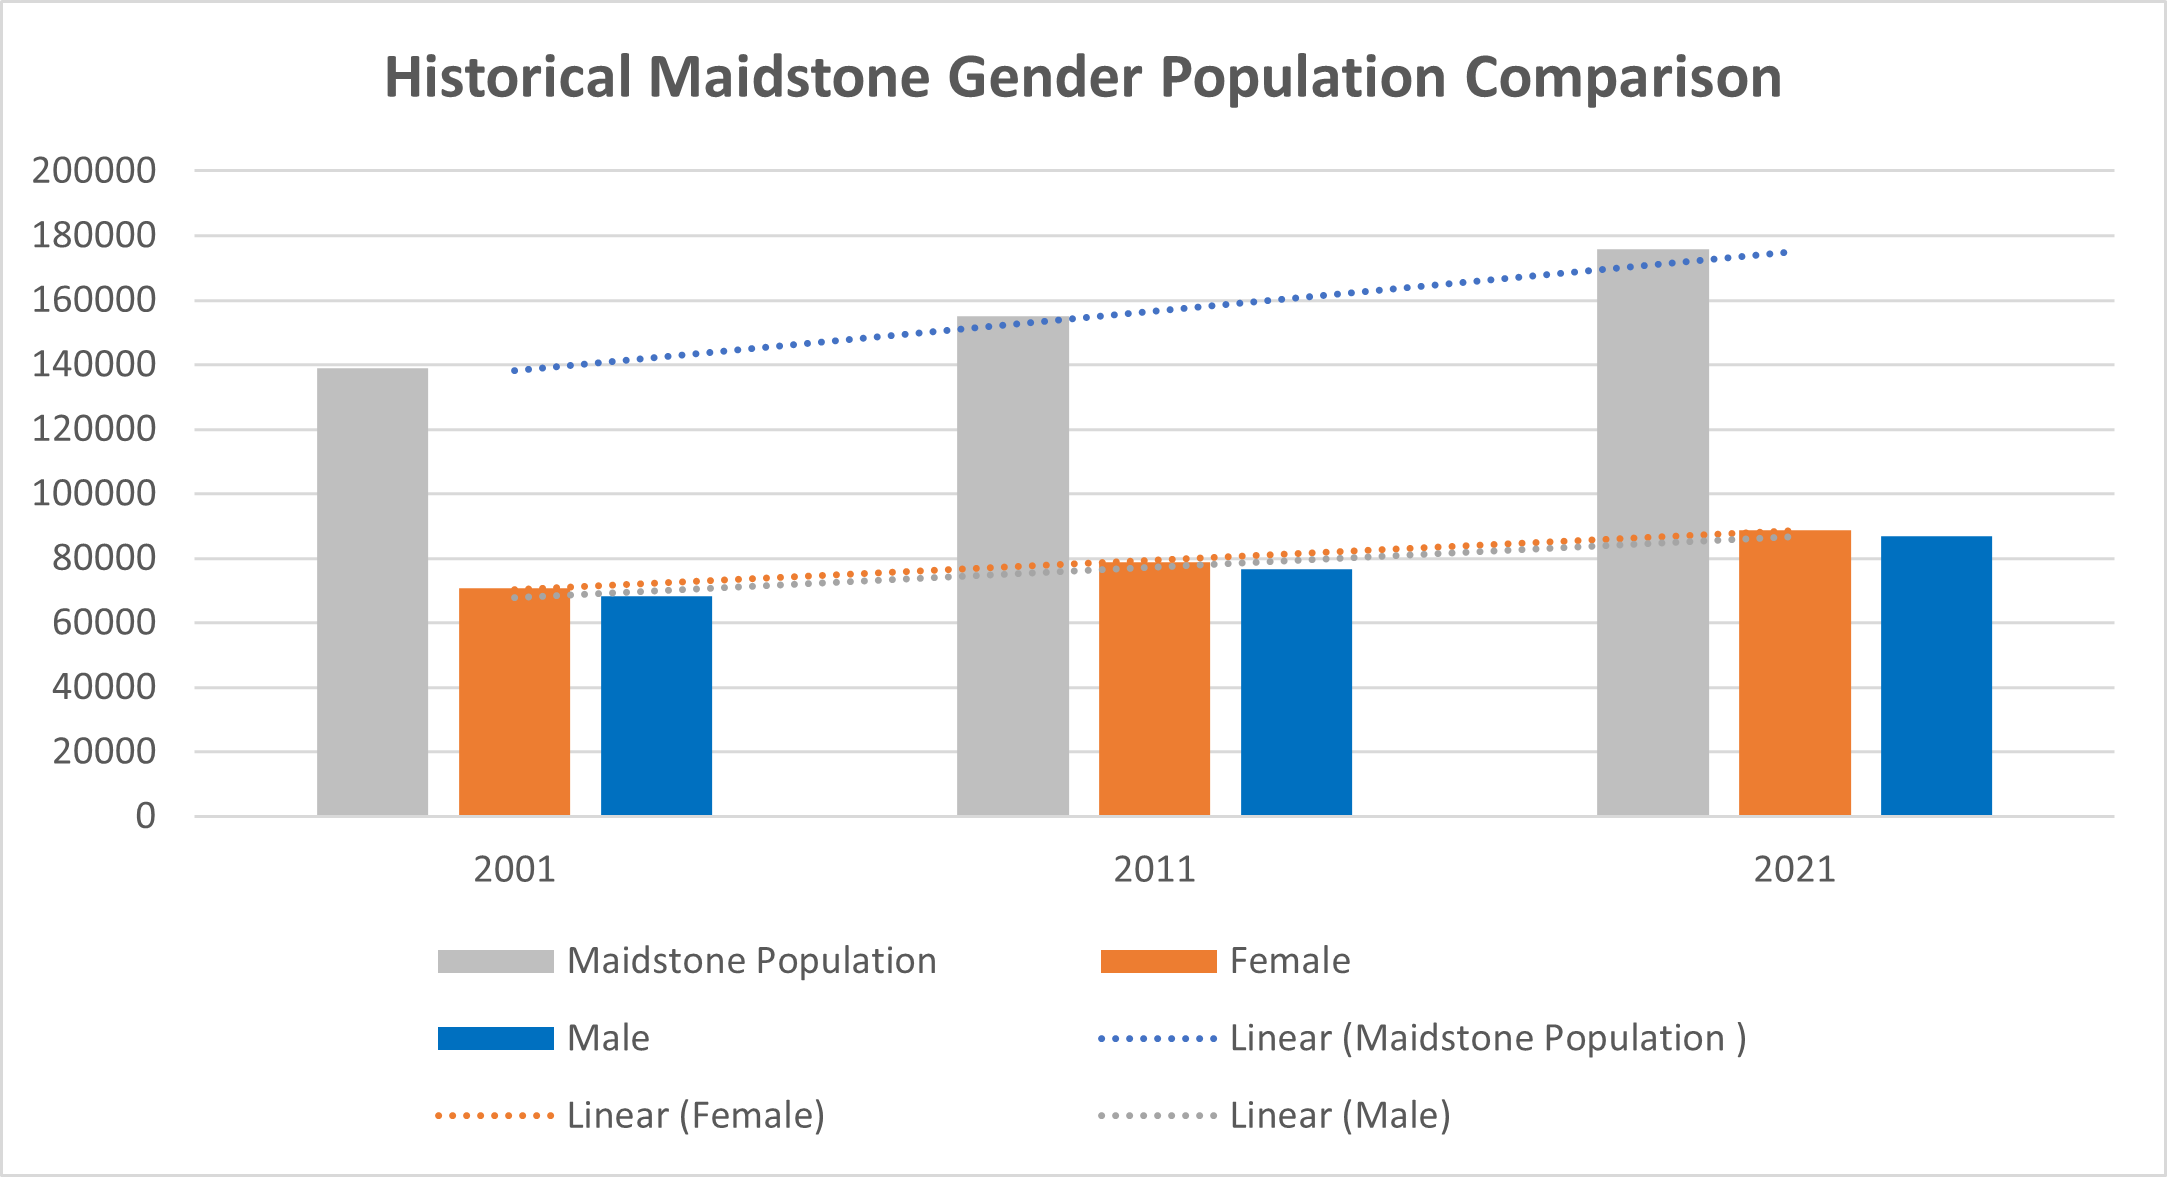 Graph to show Historical Maidstone Gender Population Comparison in Maidstone. While the population in Maidstone saw a 13.3% growth against 2011, the female population grew by 12.9%, and the male population saw a growth of 13.7% against 2011 data. 